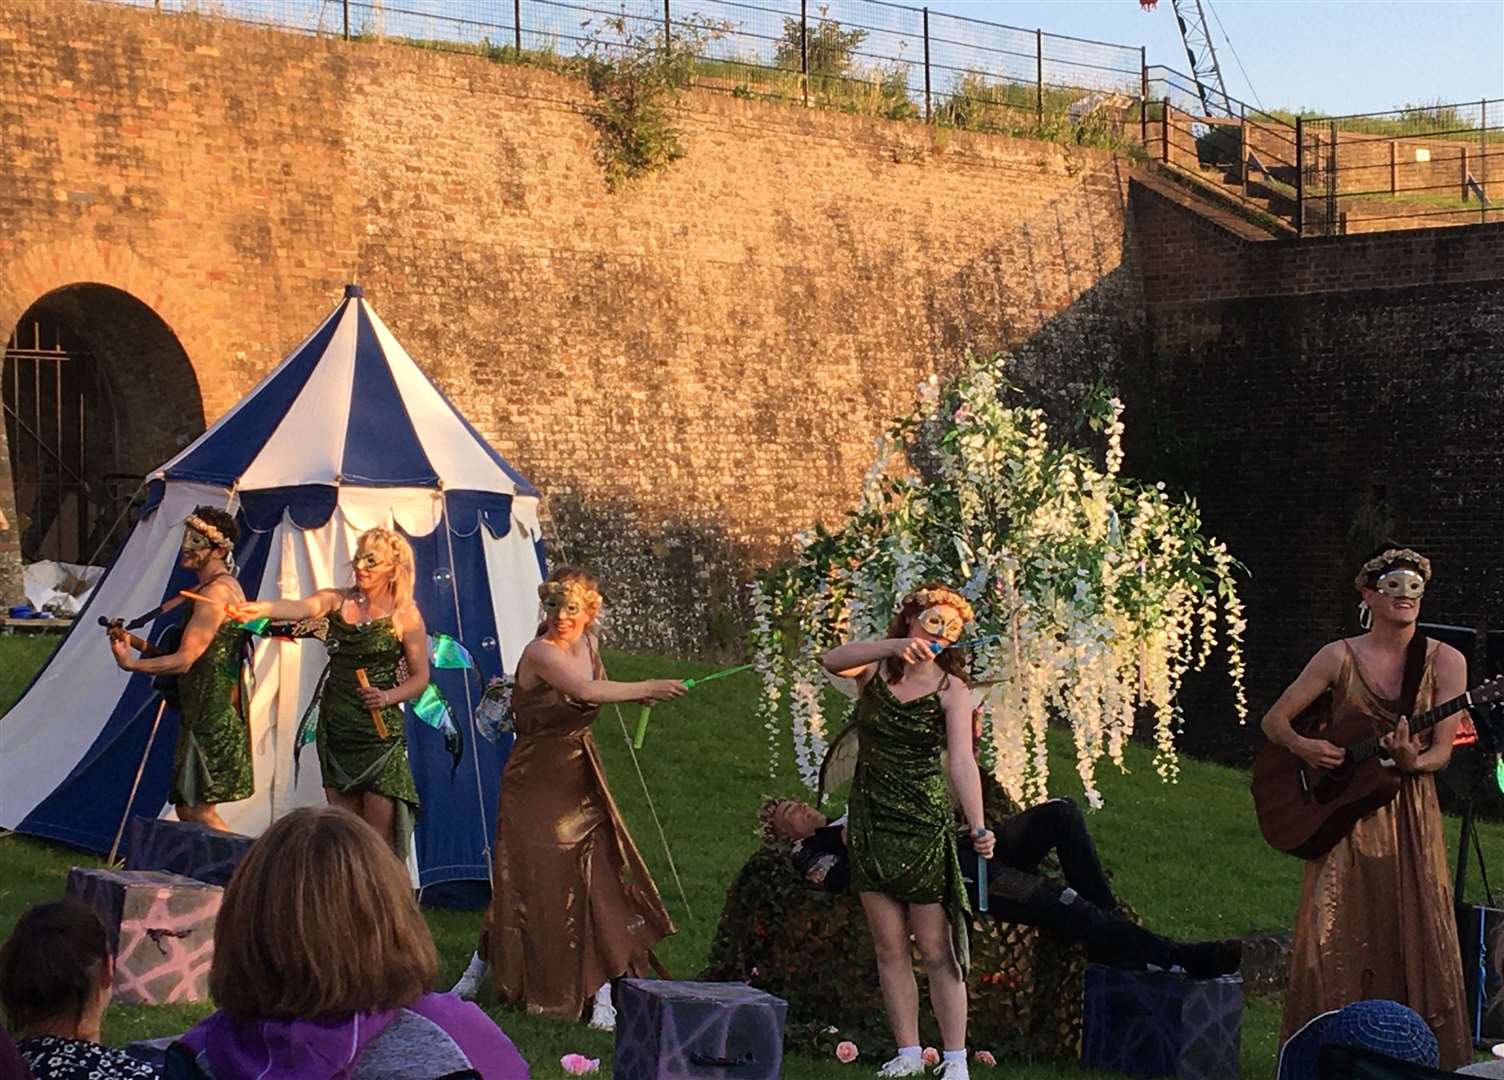 Changeling Theatre at Fort Amherst - touring with A Midsummer Night's Dream